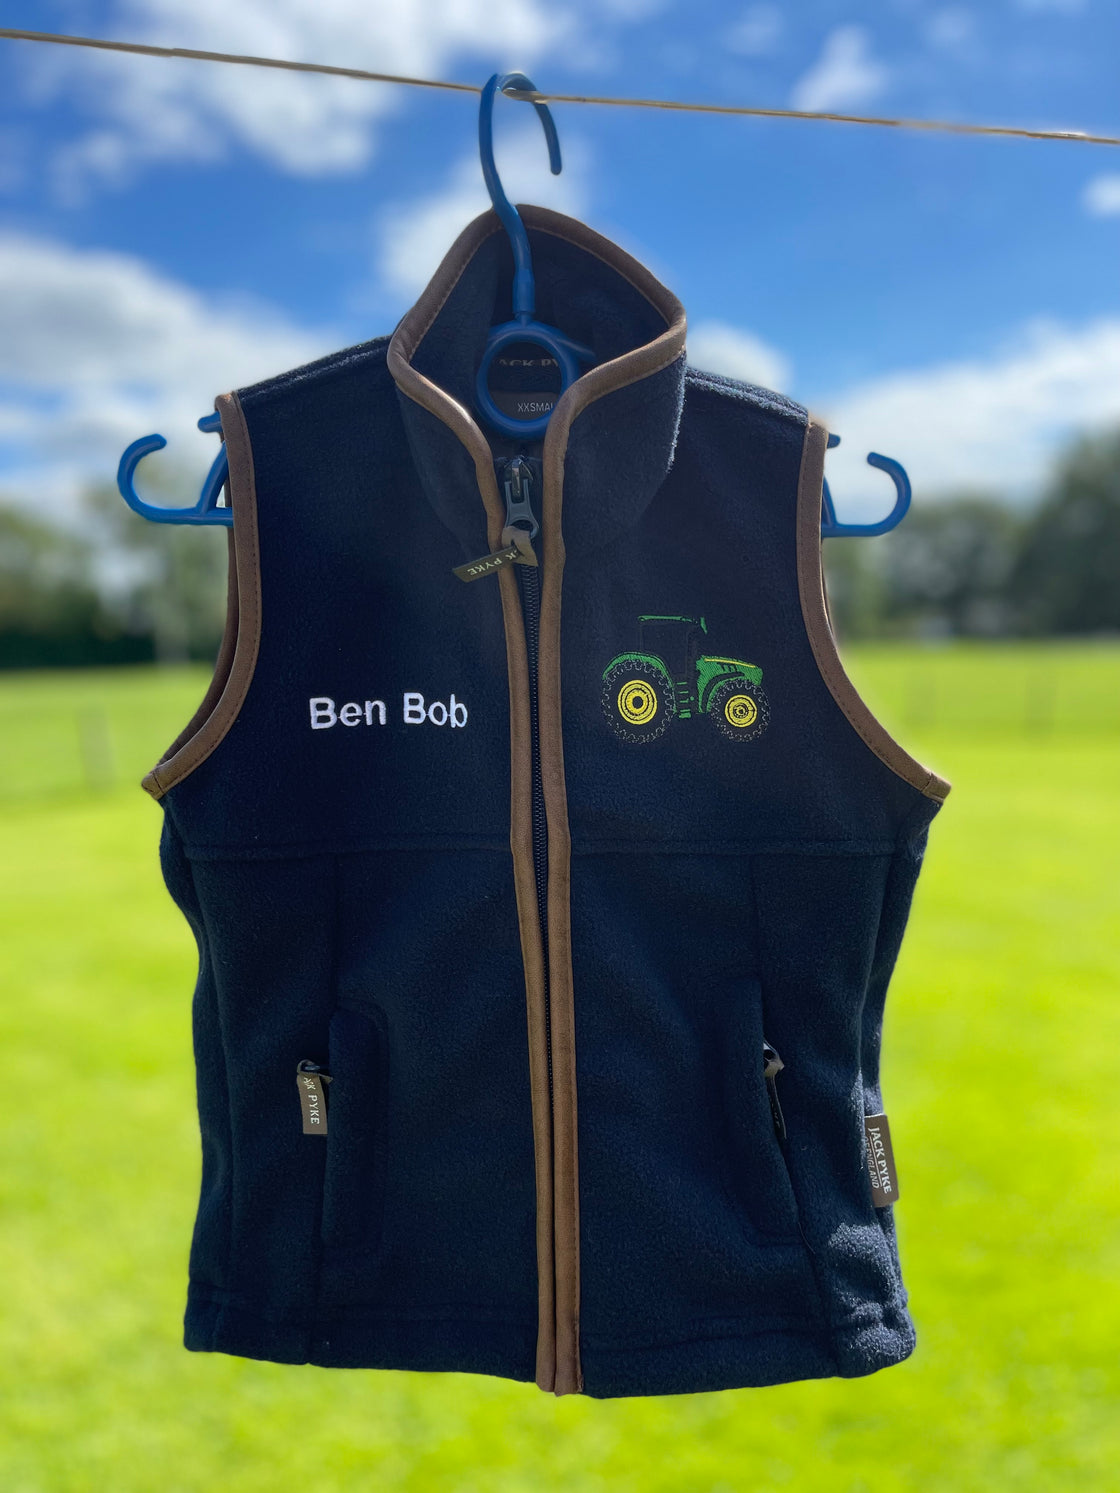 Gilet Embroidered With Tractor or Animal Design